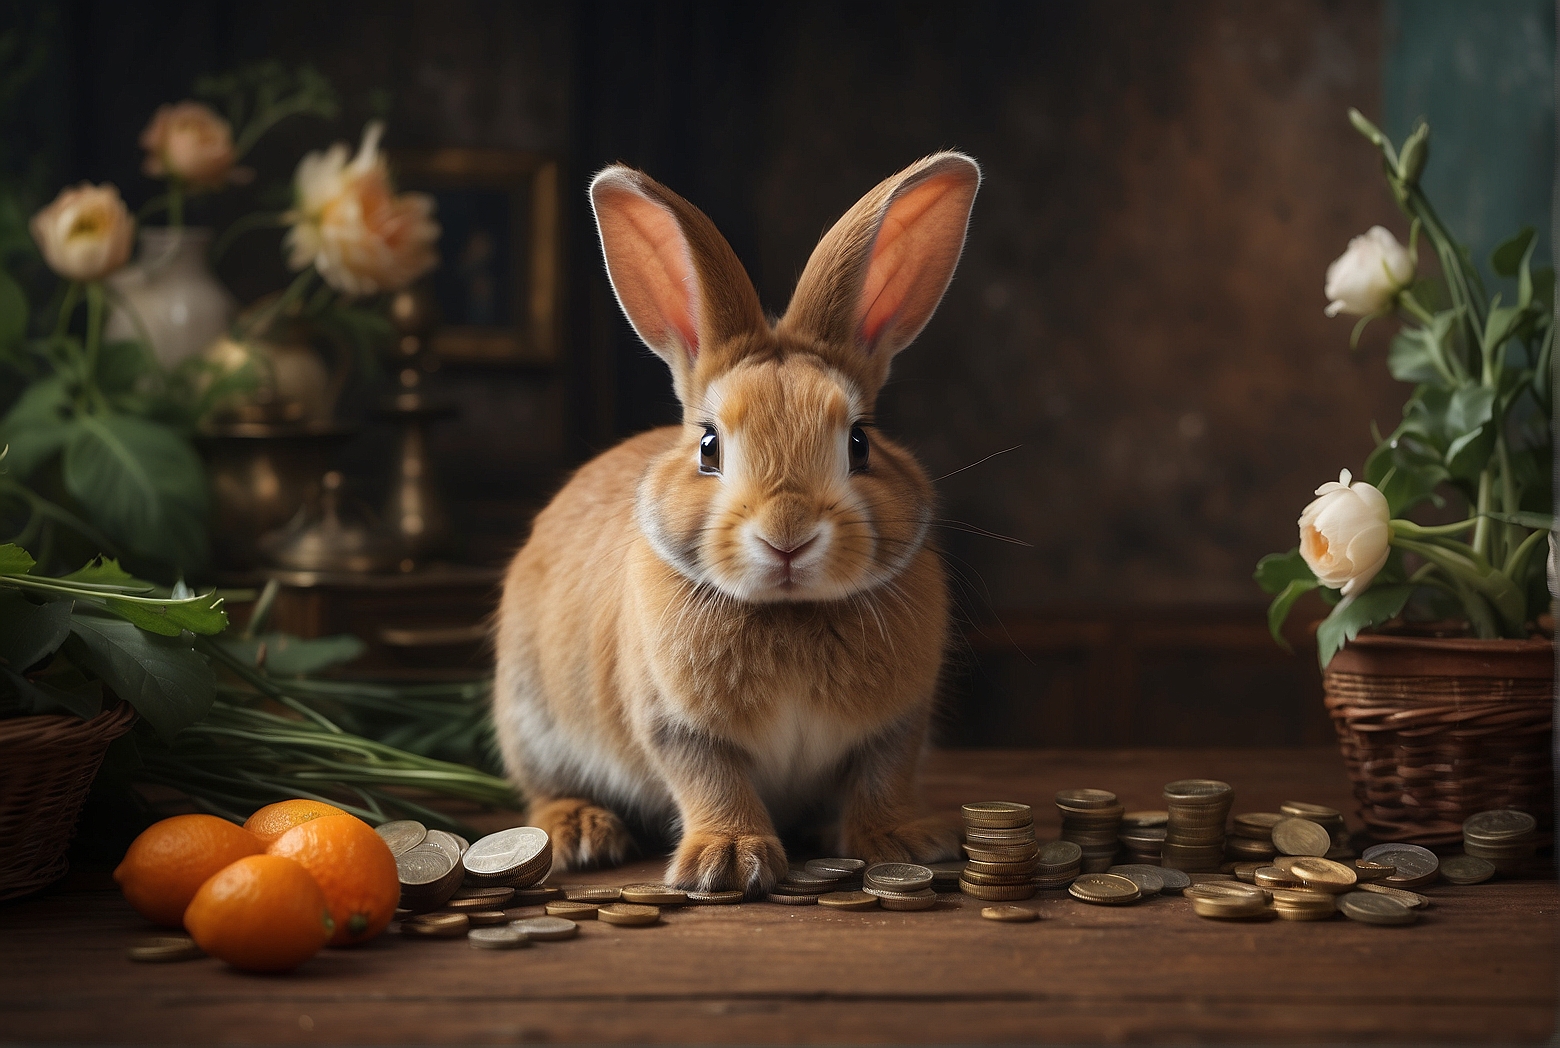 How to Determine the Cost of a Dutch Rabbit